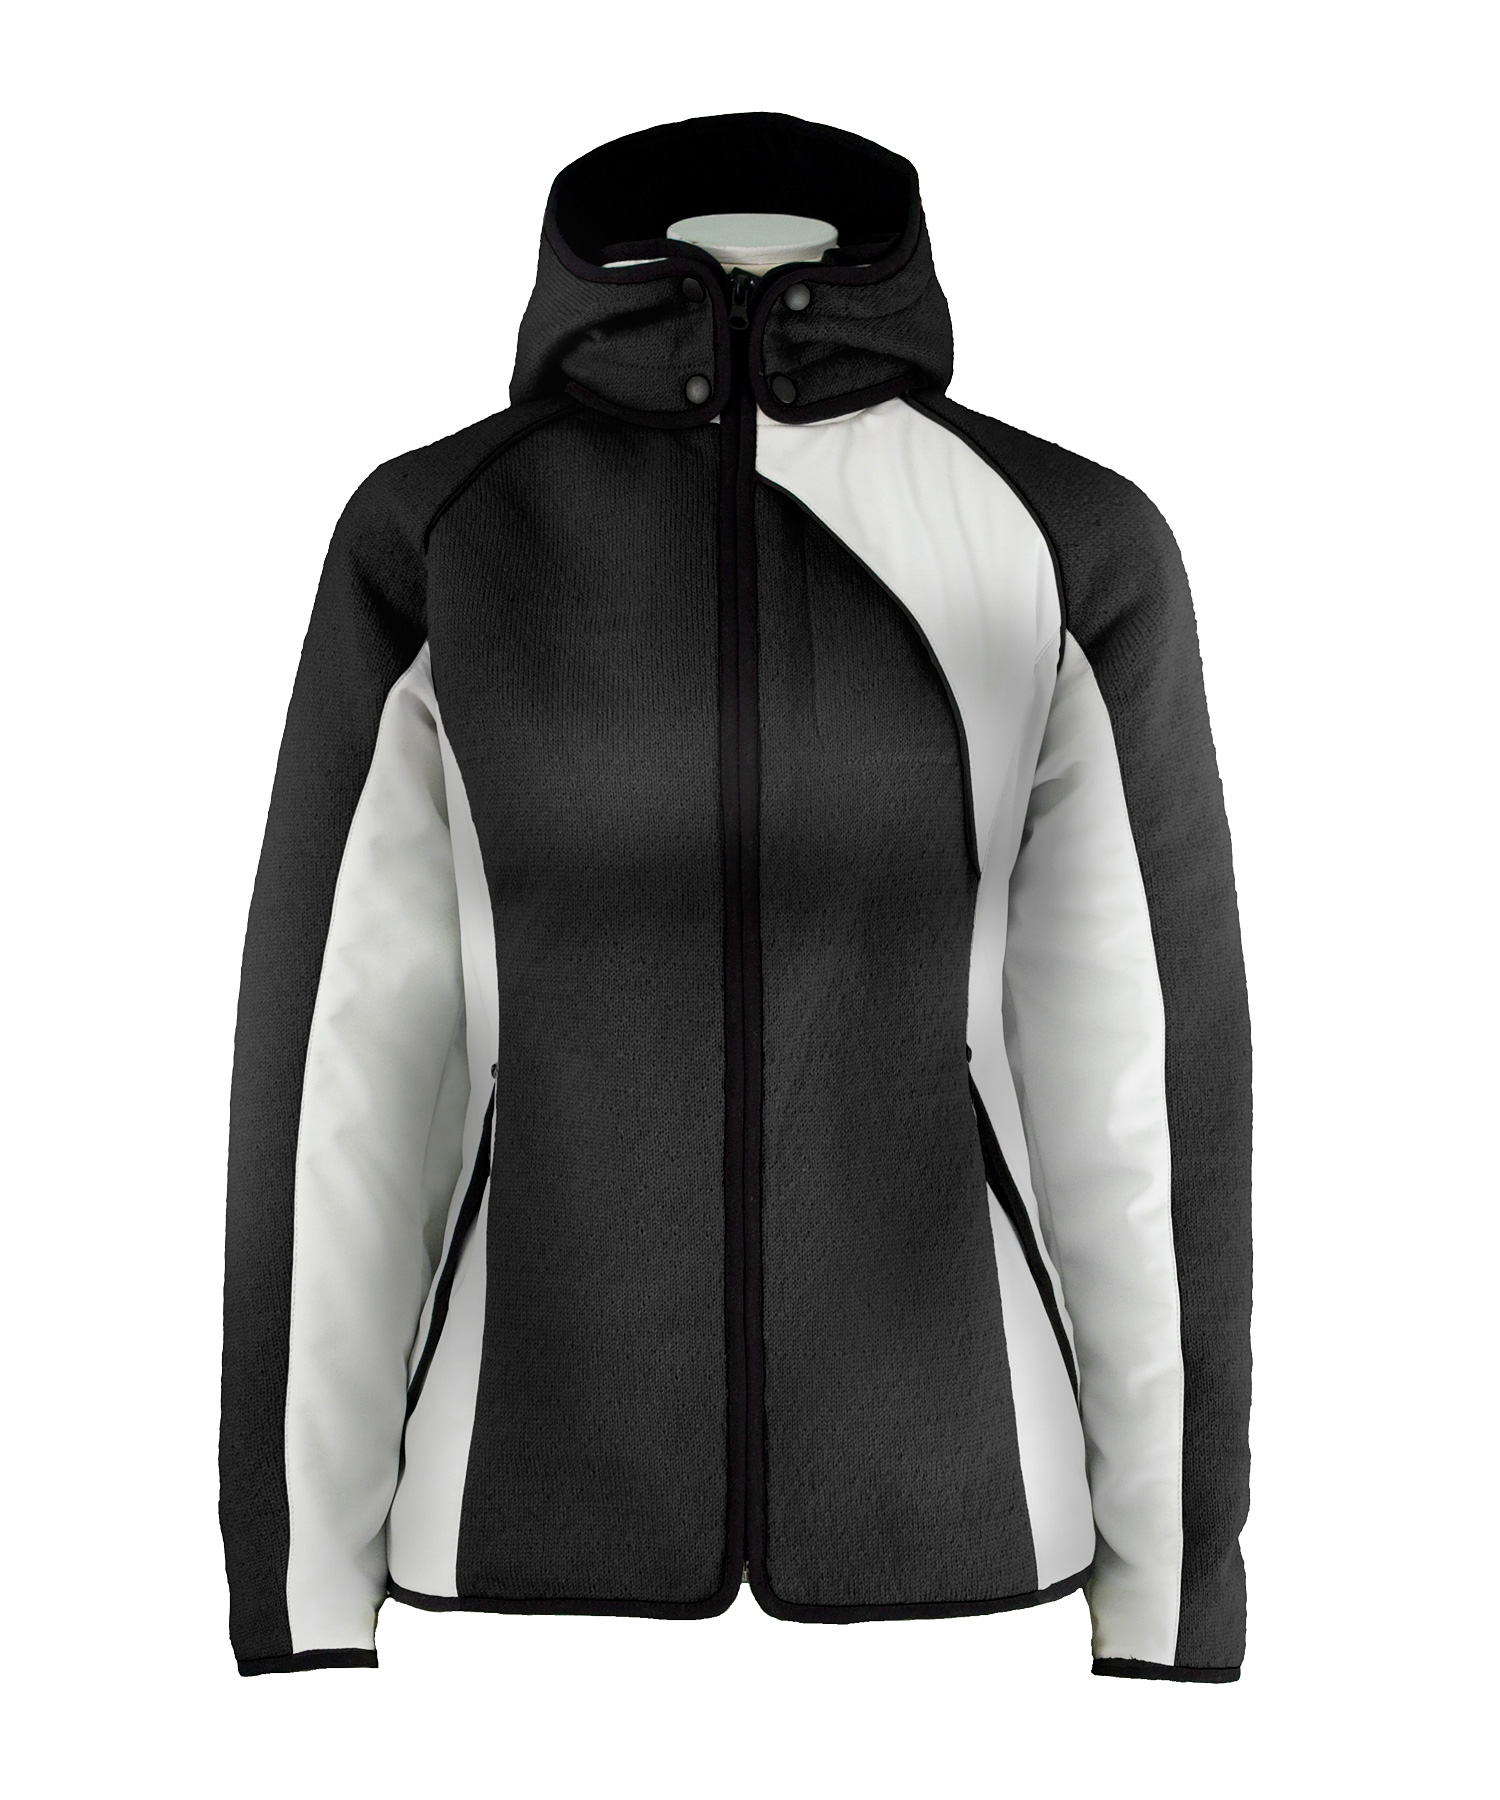 of Jacket Archive NorwaySports.com at Knitshell Women\'s Dale Val Norway Gardena